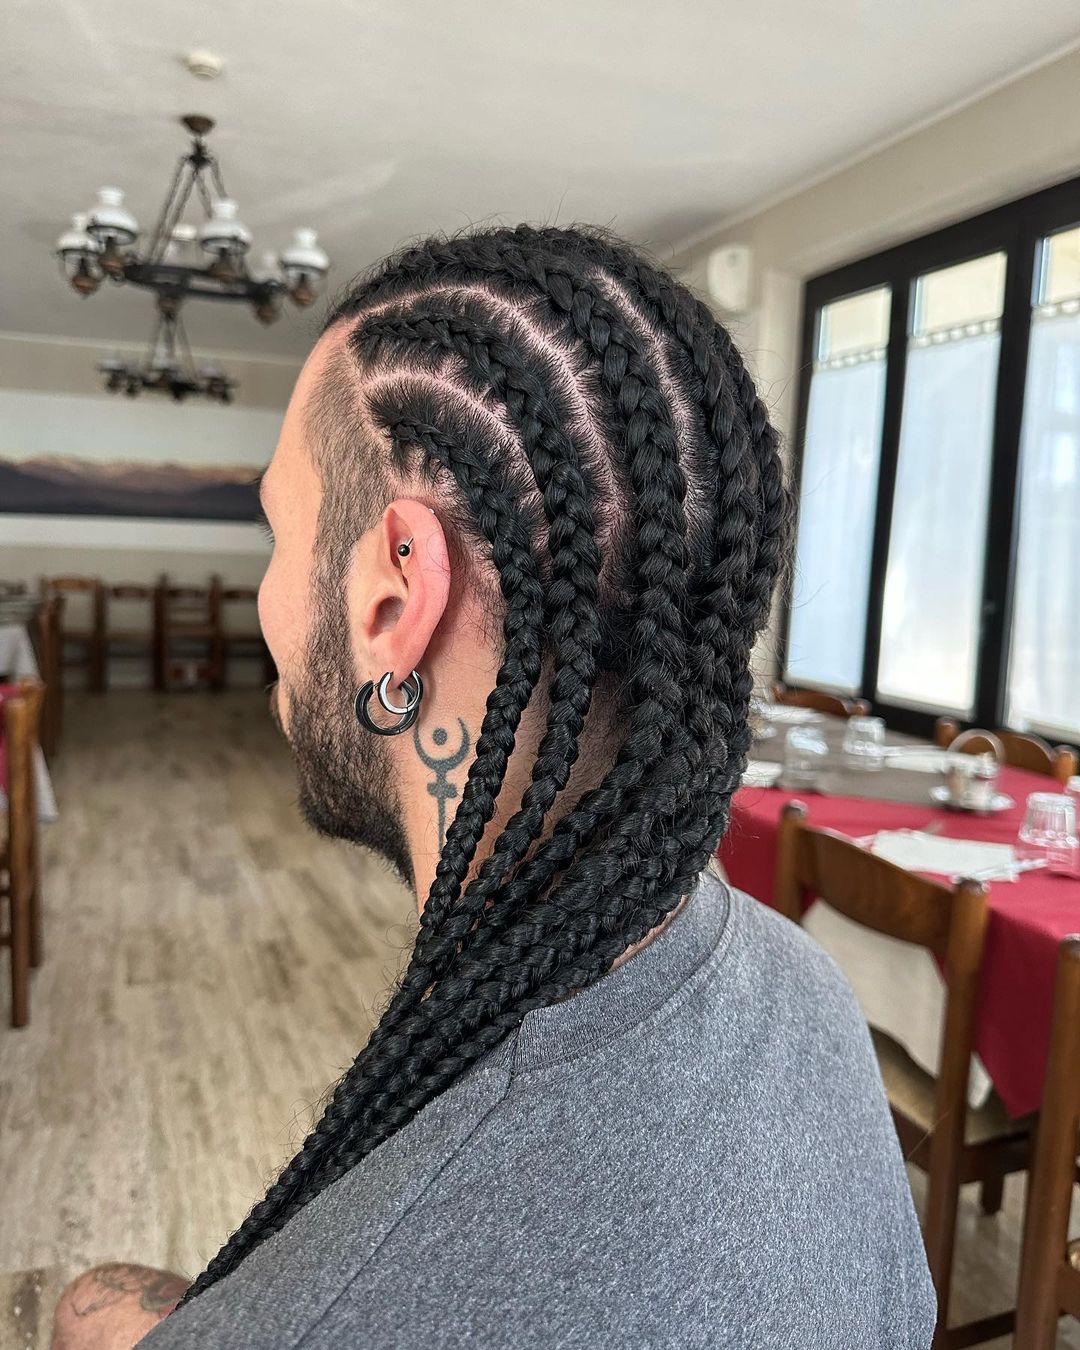 54. Large Cornrows With Long Braids